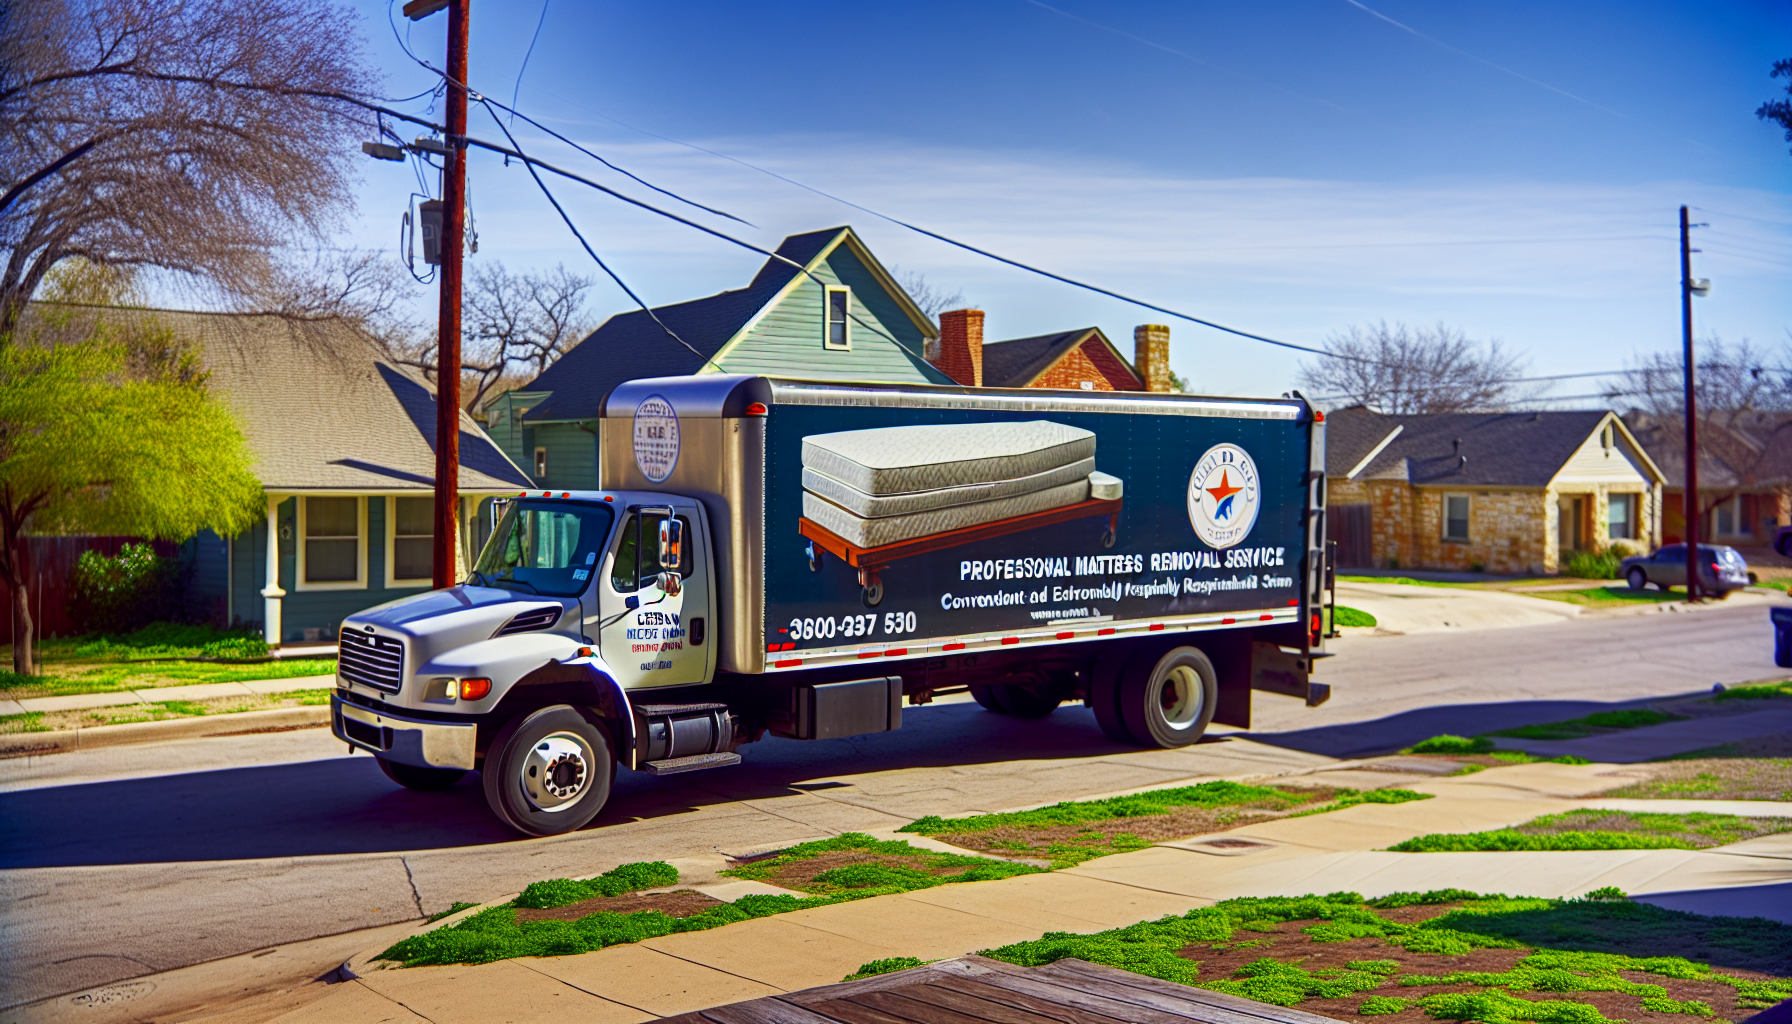 Professional mattress removal service truck parked outside a residential area in Cedar Park